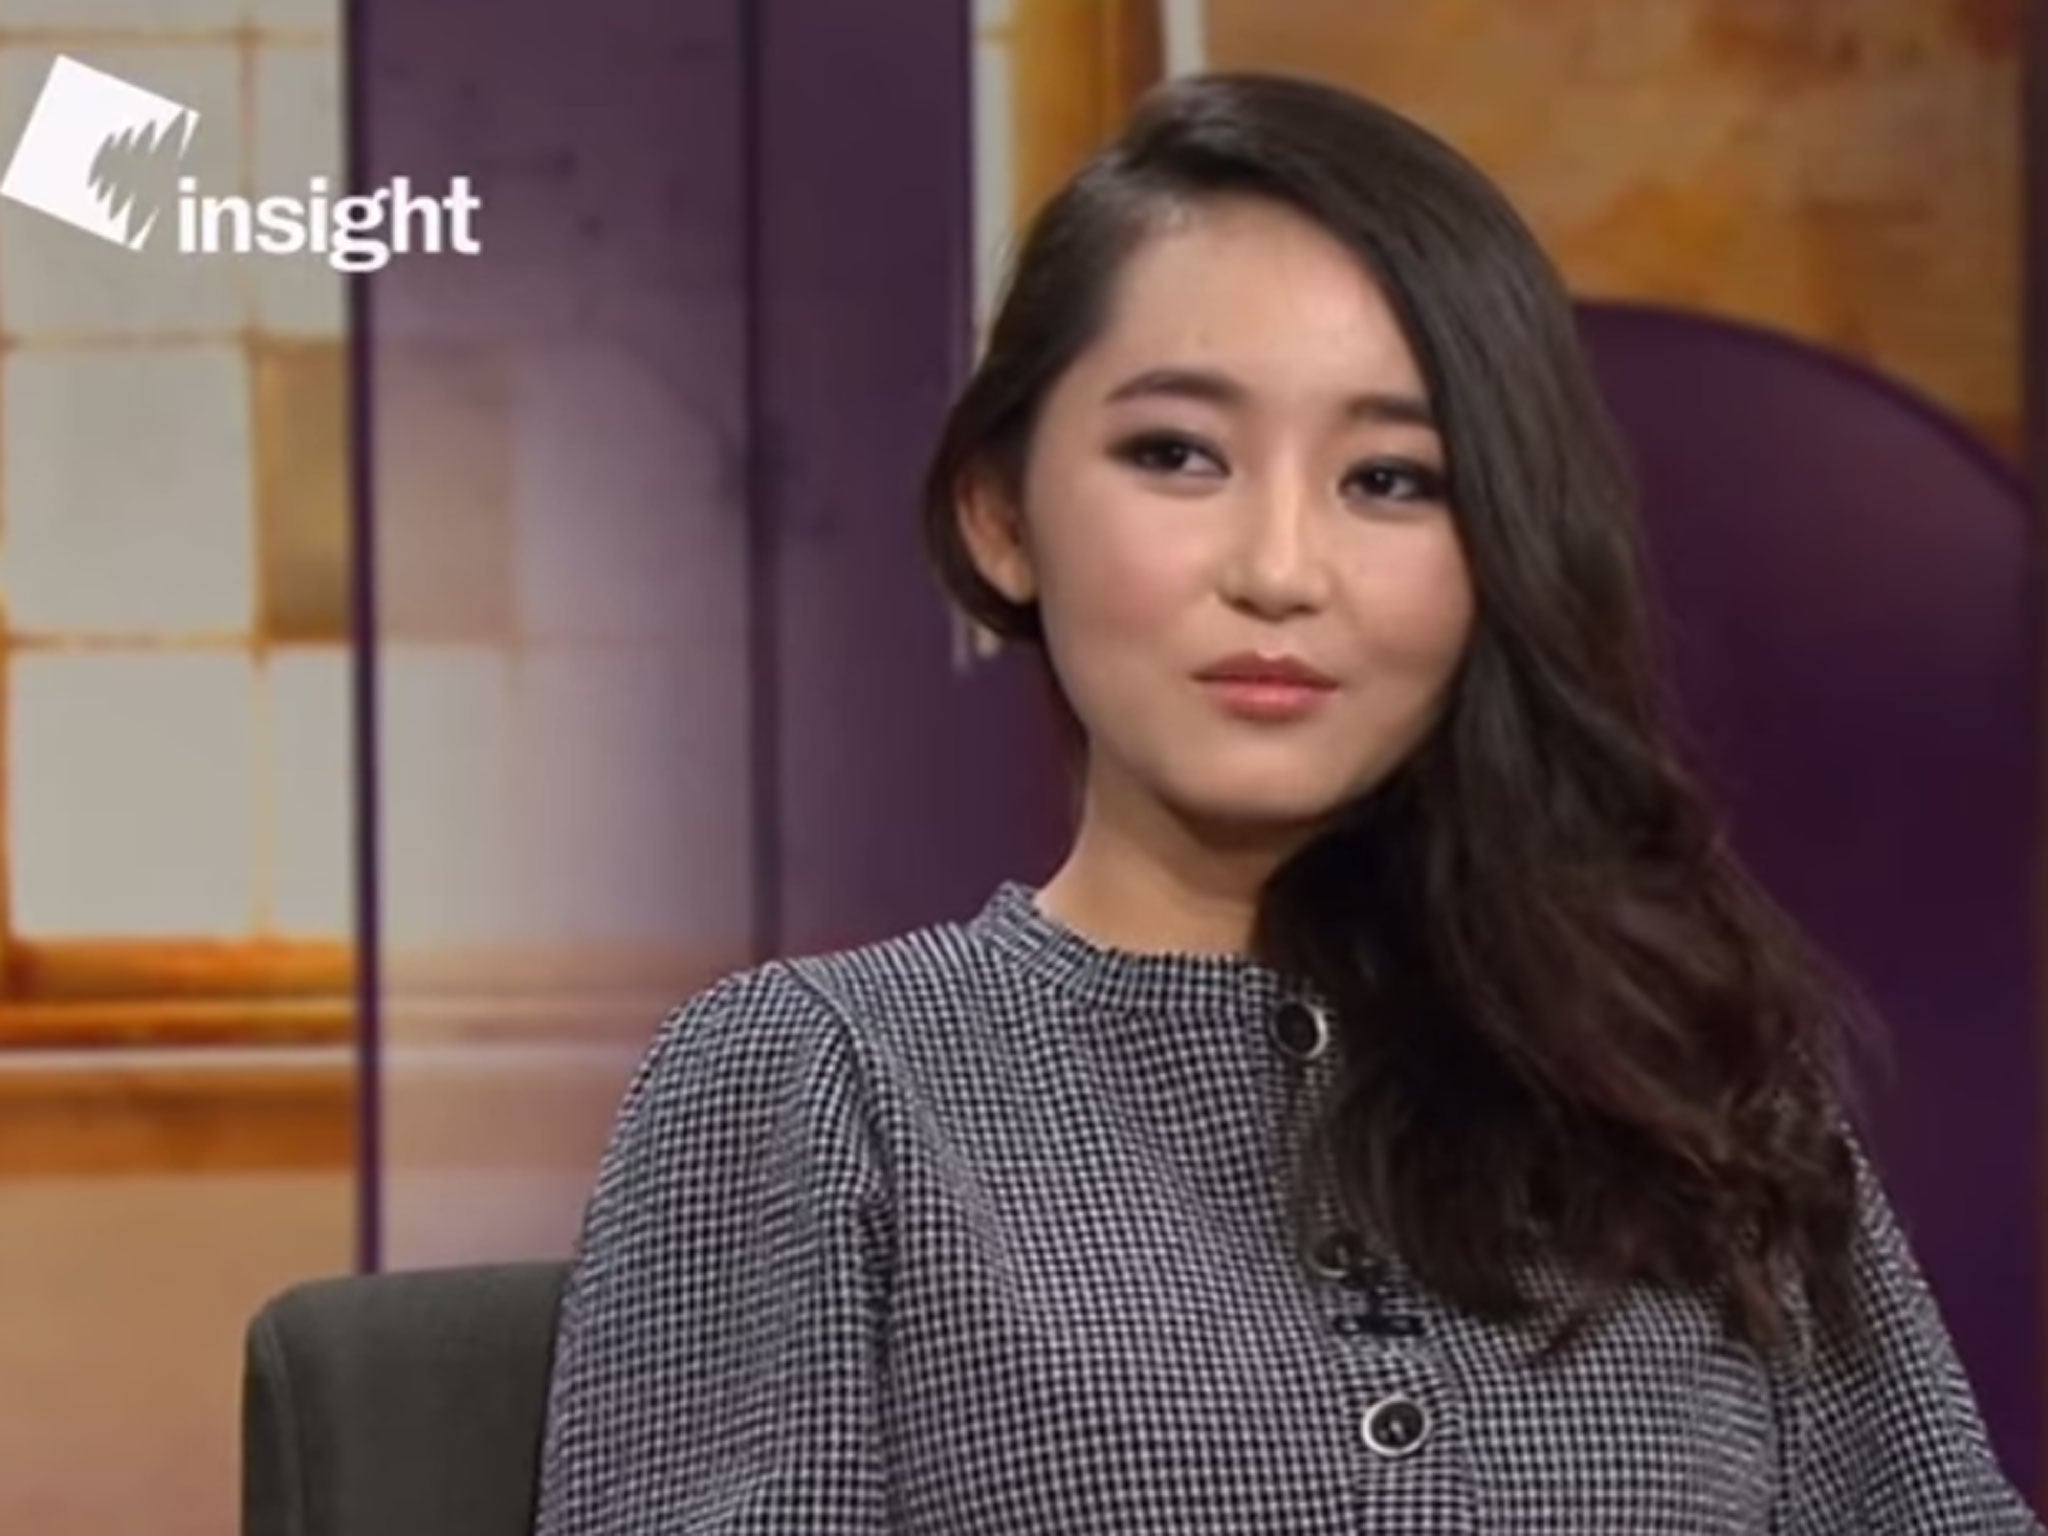 Yeonmi Park, 20, told SBS she had been brought up to believe Kim Jong-il was a 'god' who could read her mind